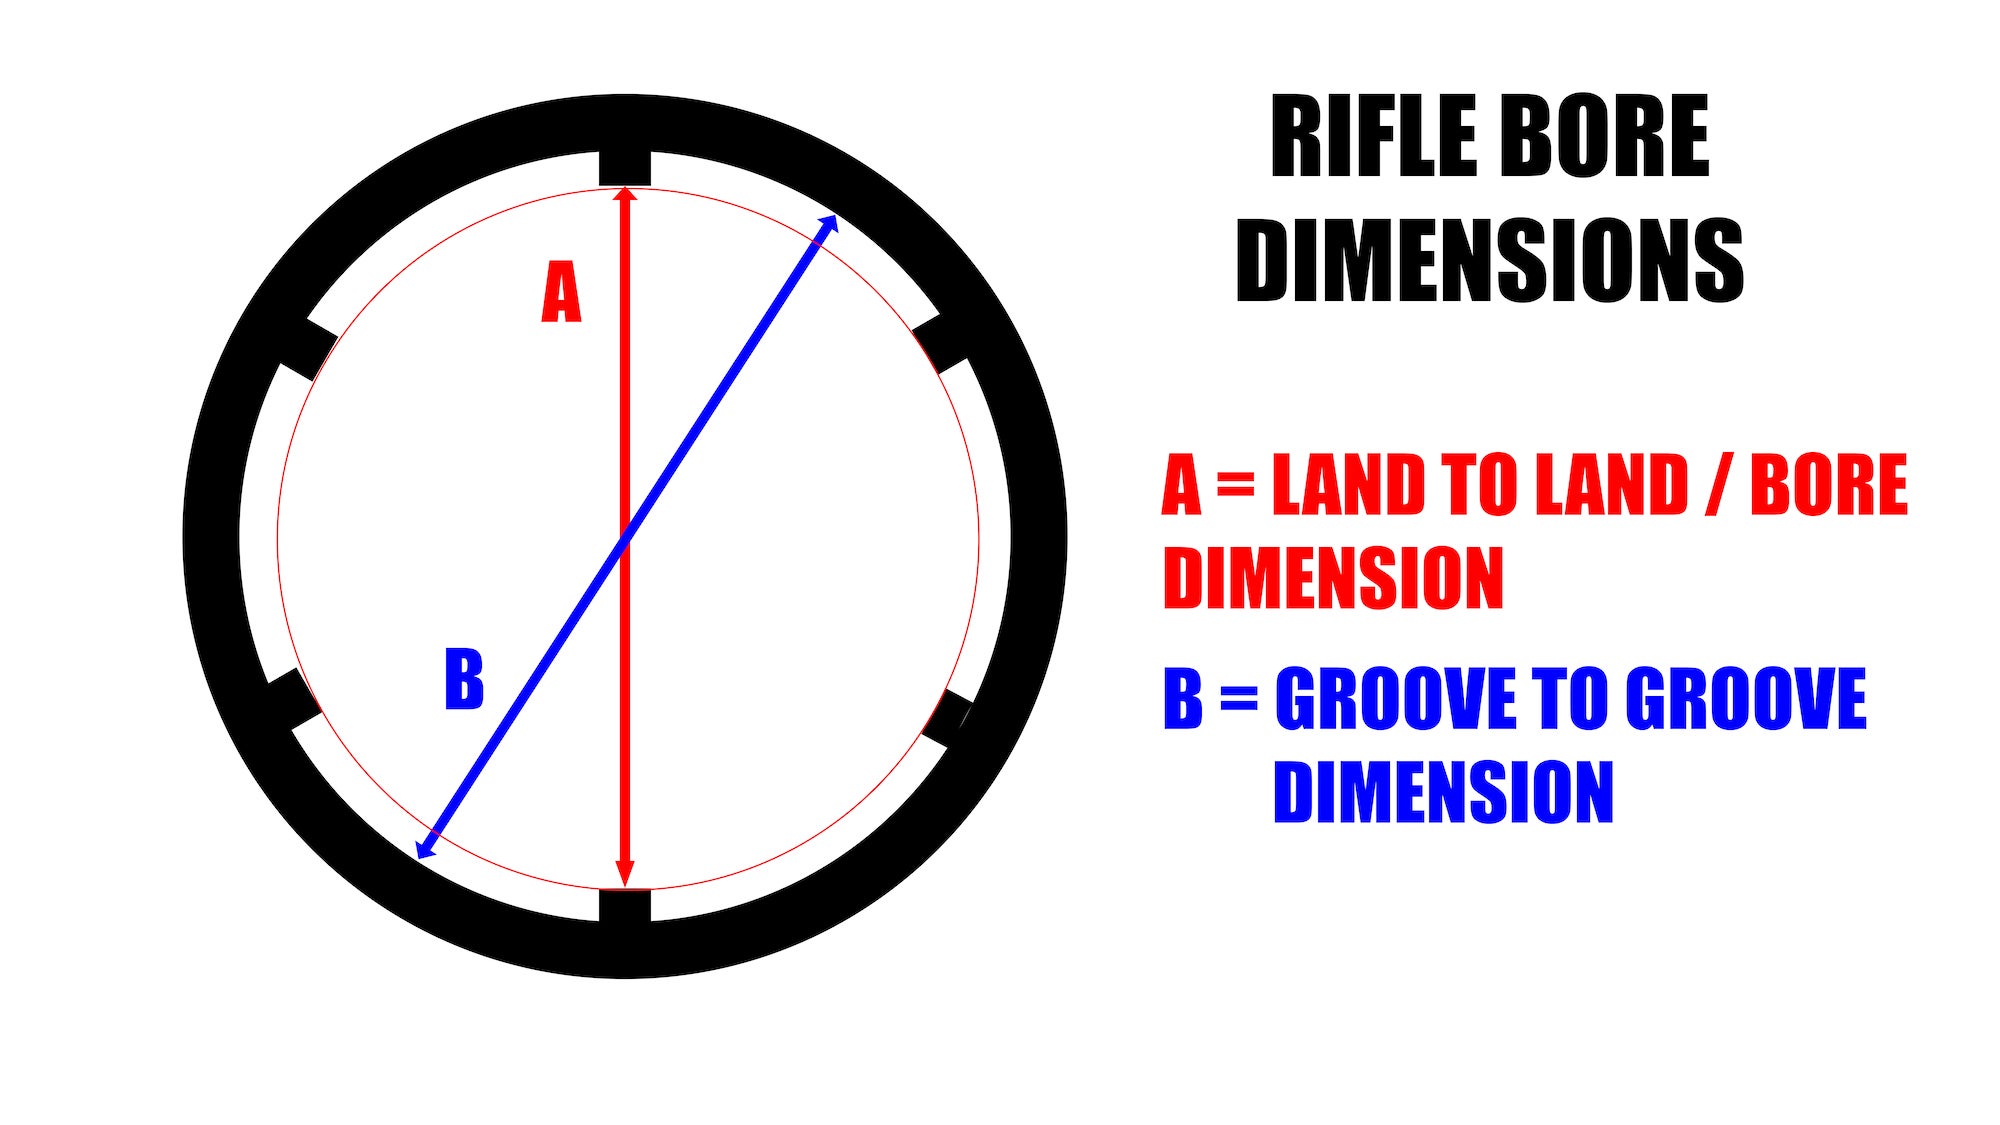 chart explaining the difference between lands and grooves in a rifle barrel.